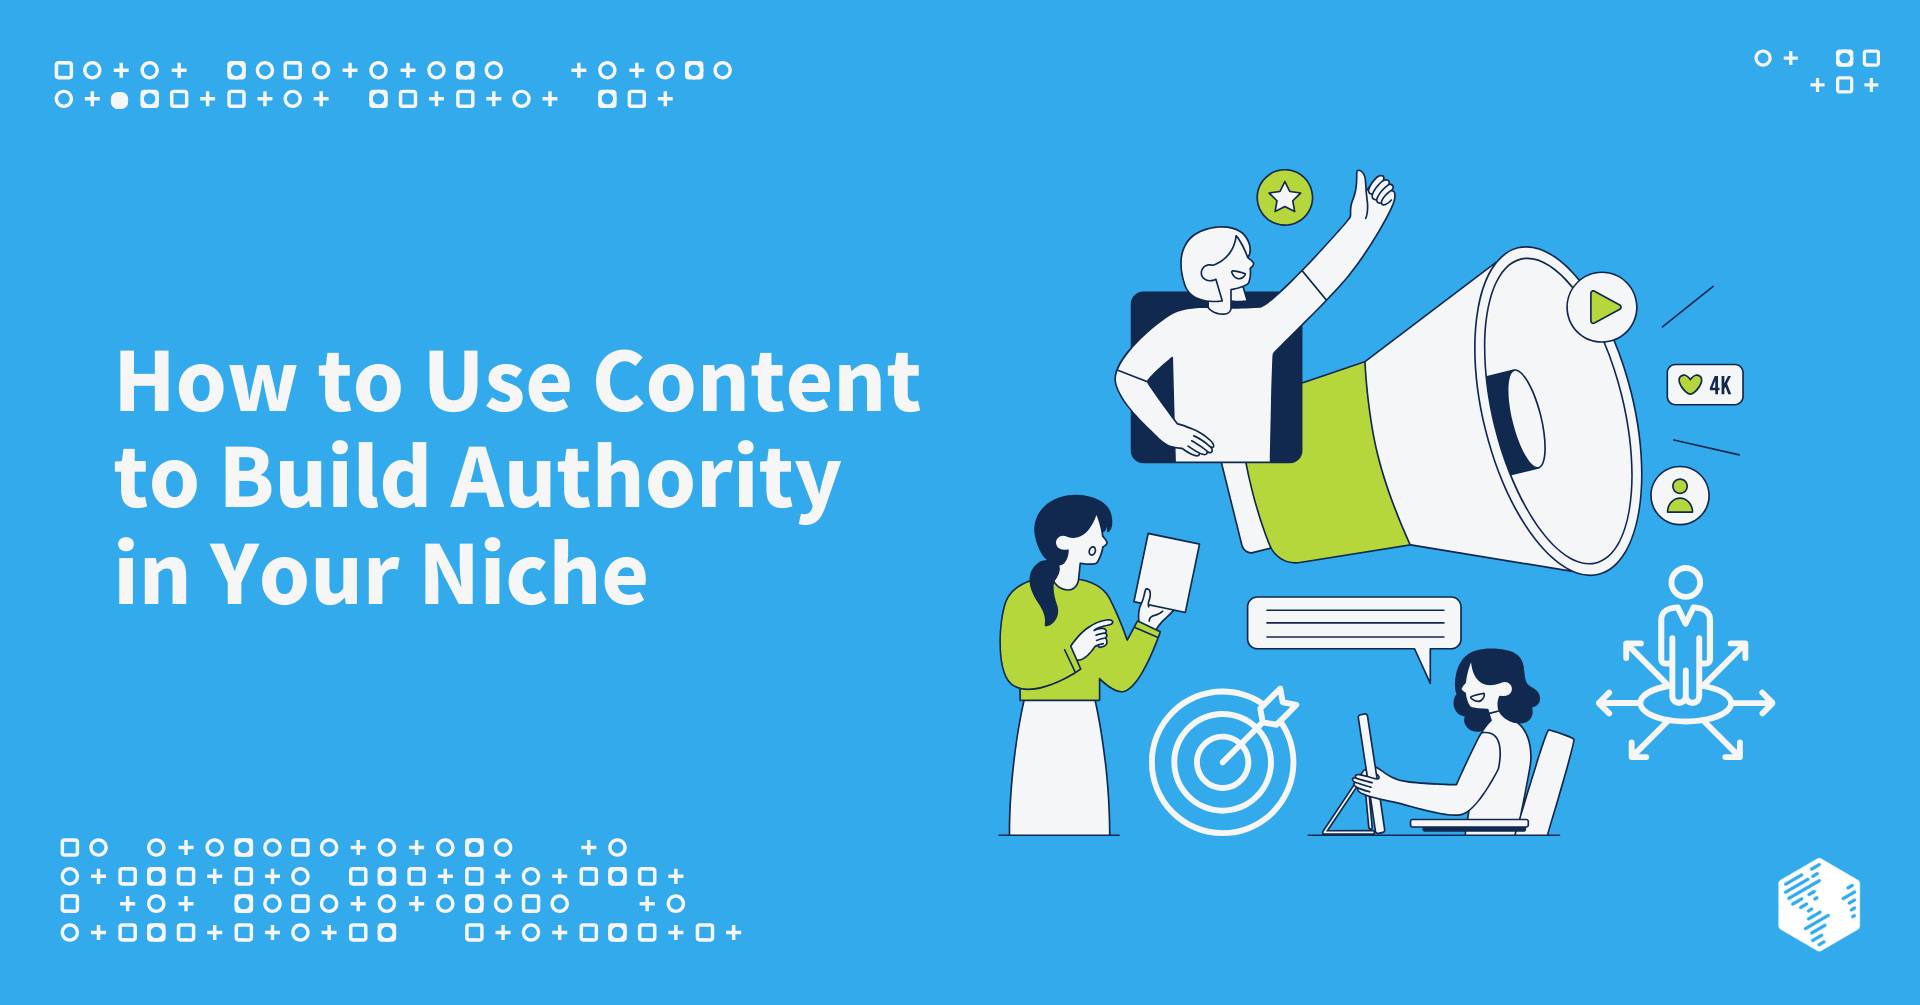 How to Use Content to Build Authority in Your Niche